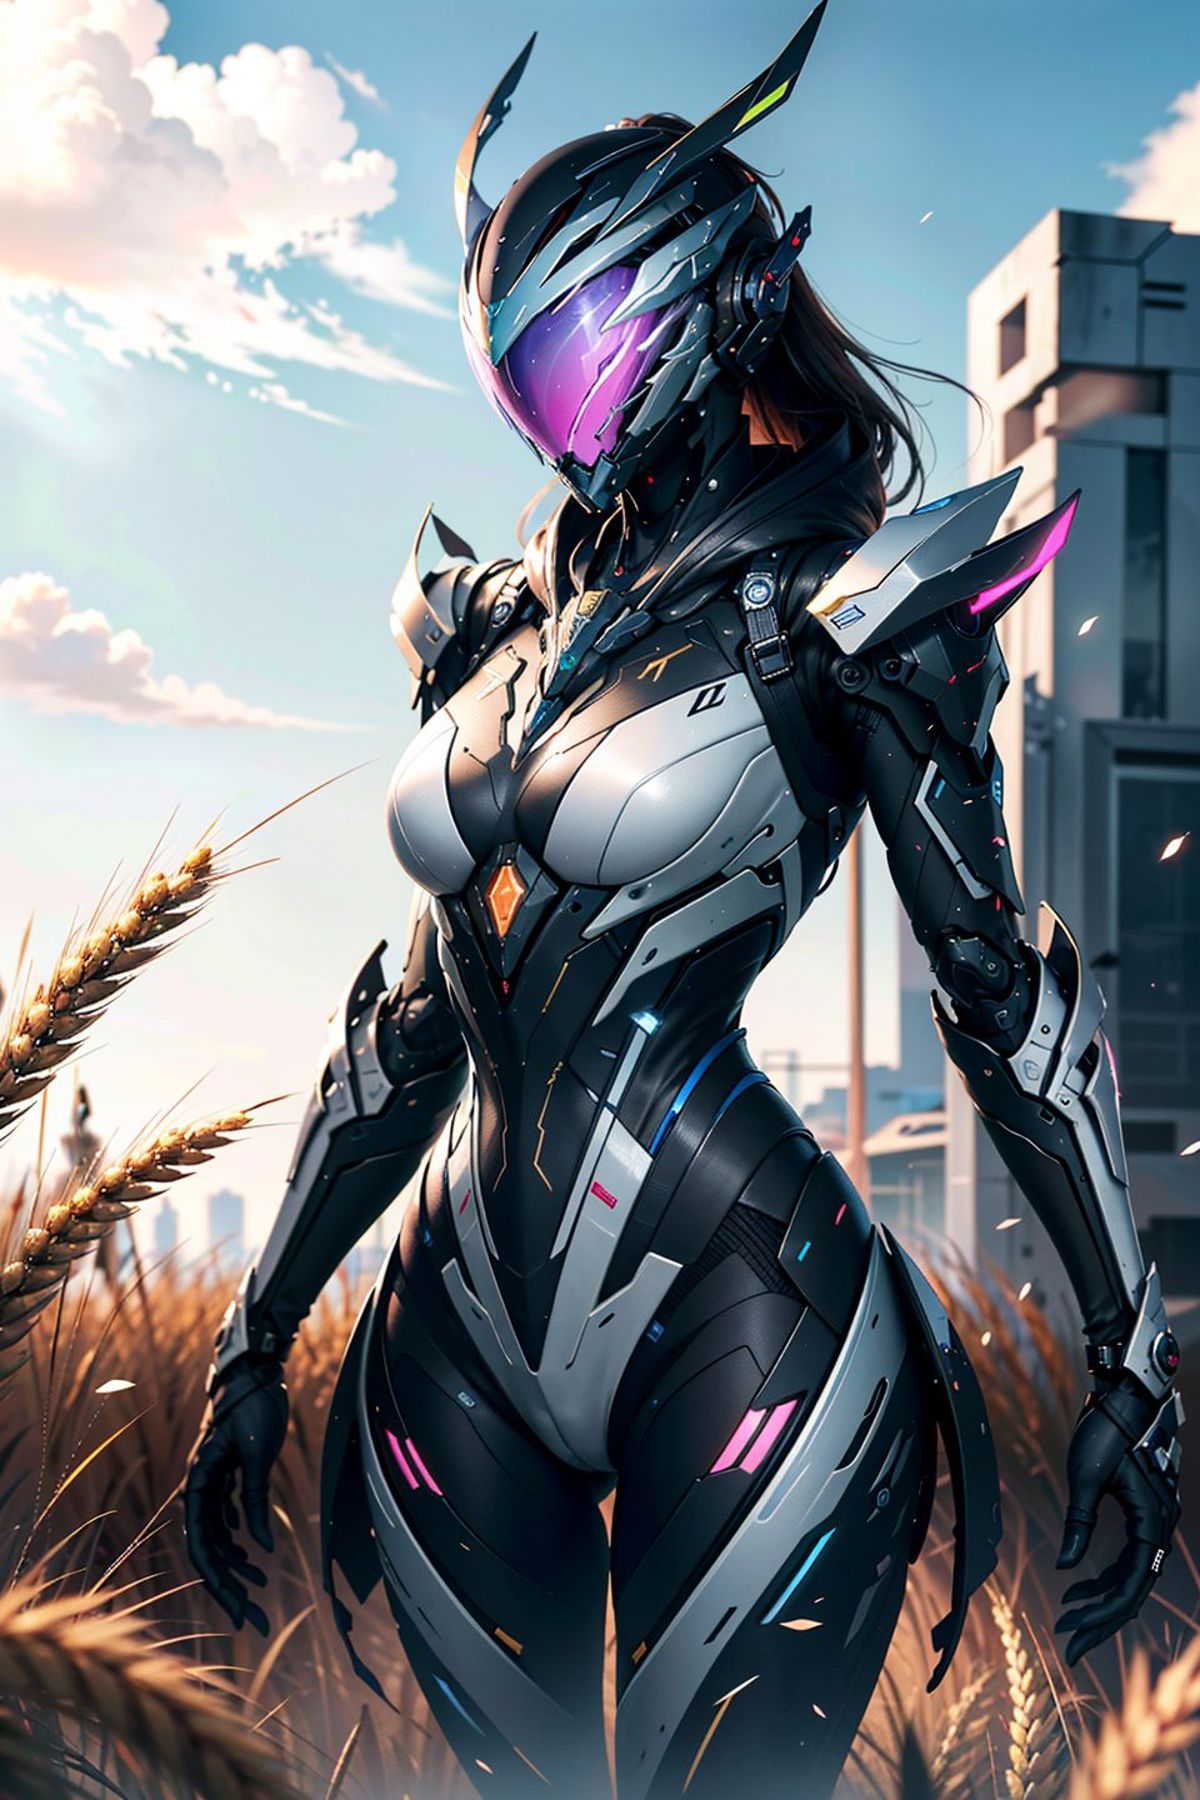 Mechanical Suit image by ylnnn